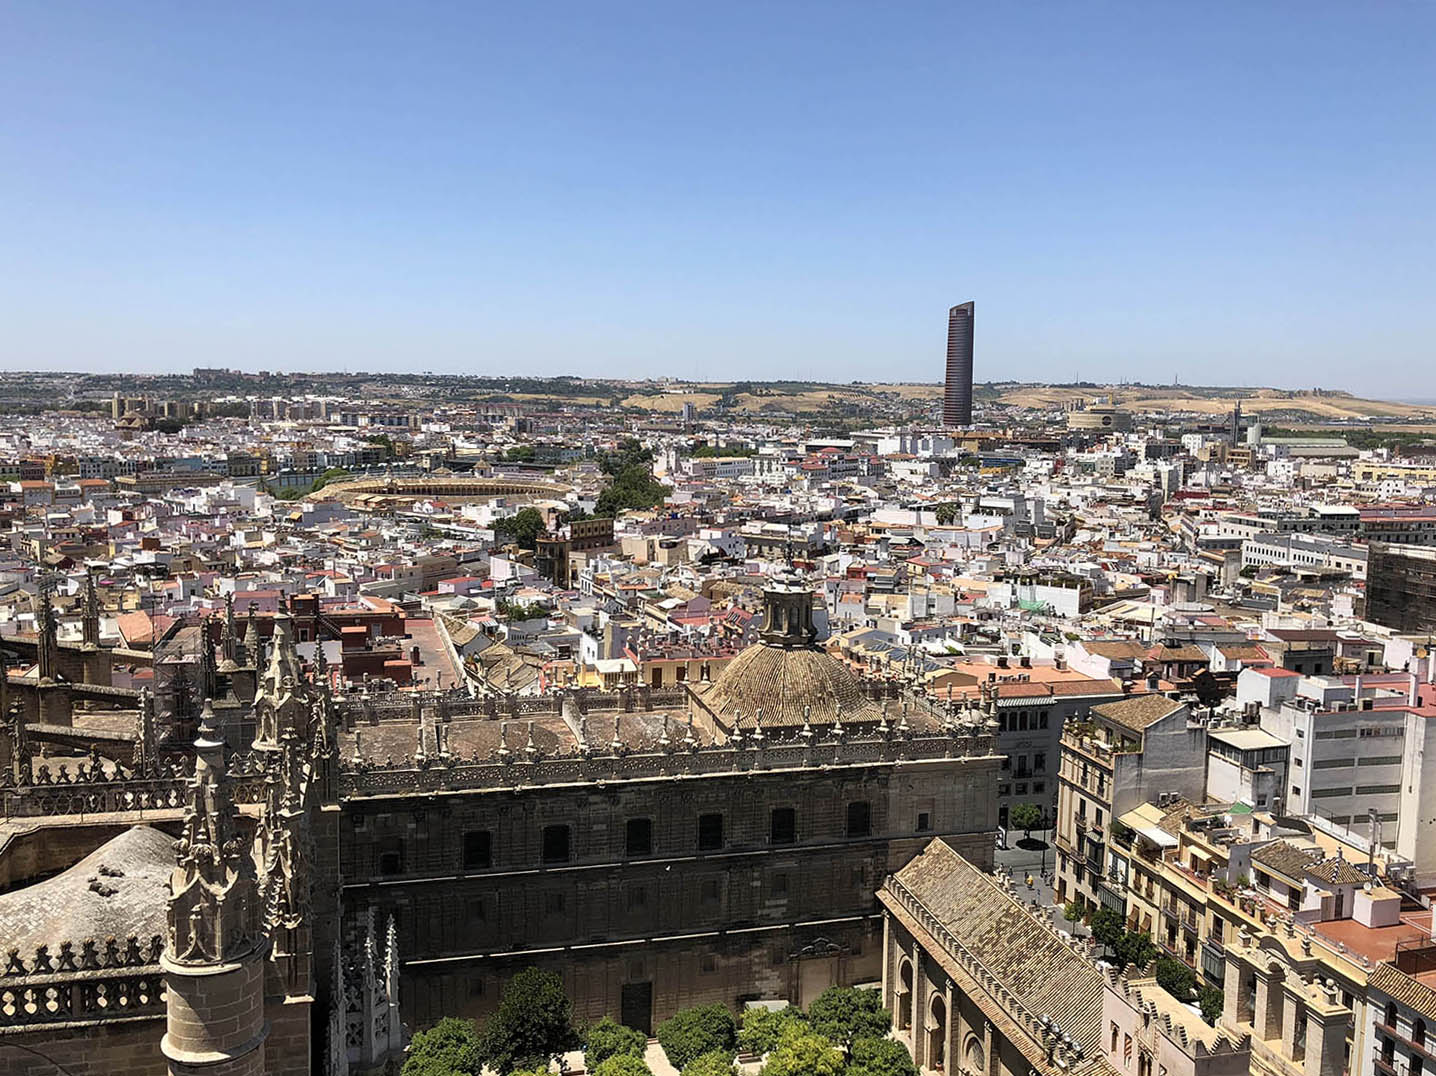 View towards northwest from La Giralda tower of Tabernacle church dome and general view of Seville.